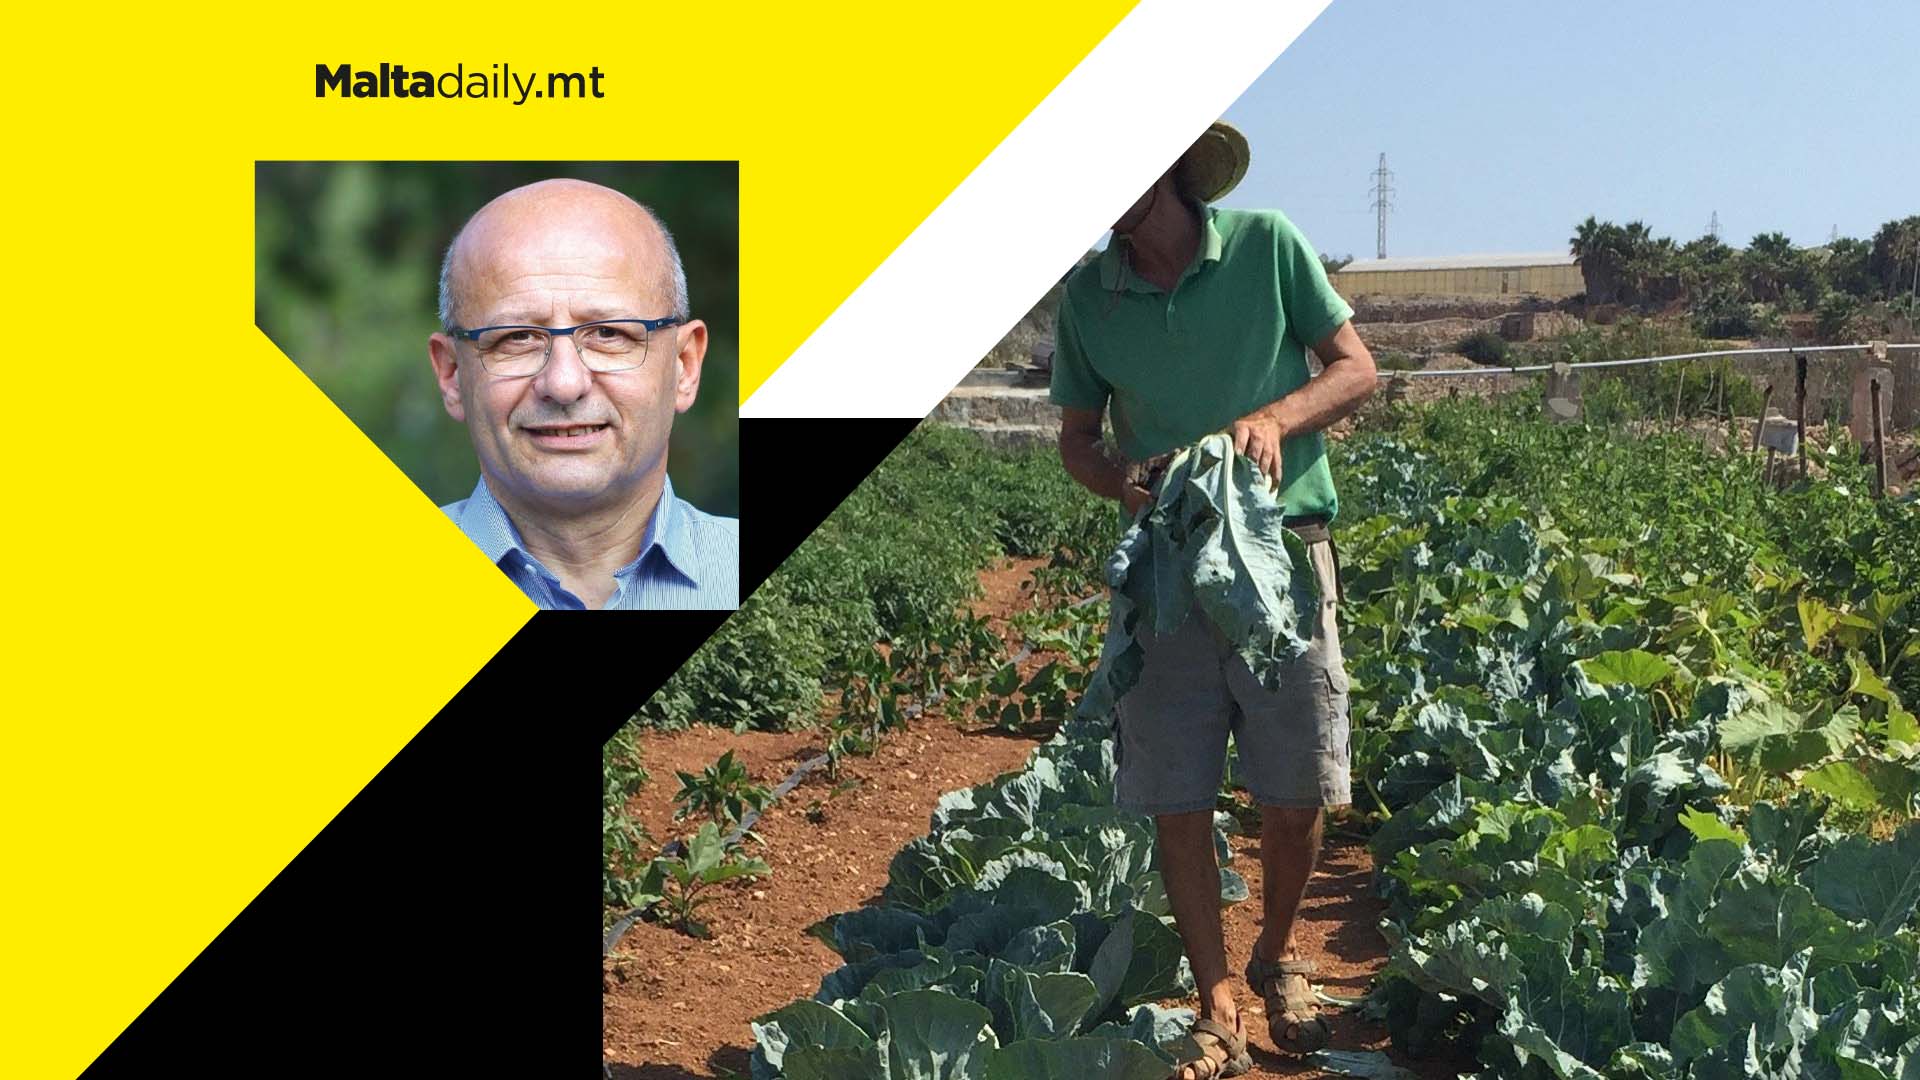 Interest free loans for farmers to buy leased land proposed by PN